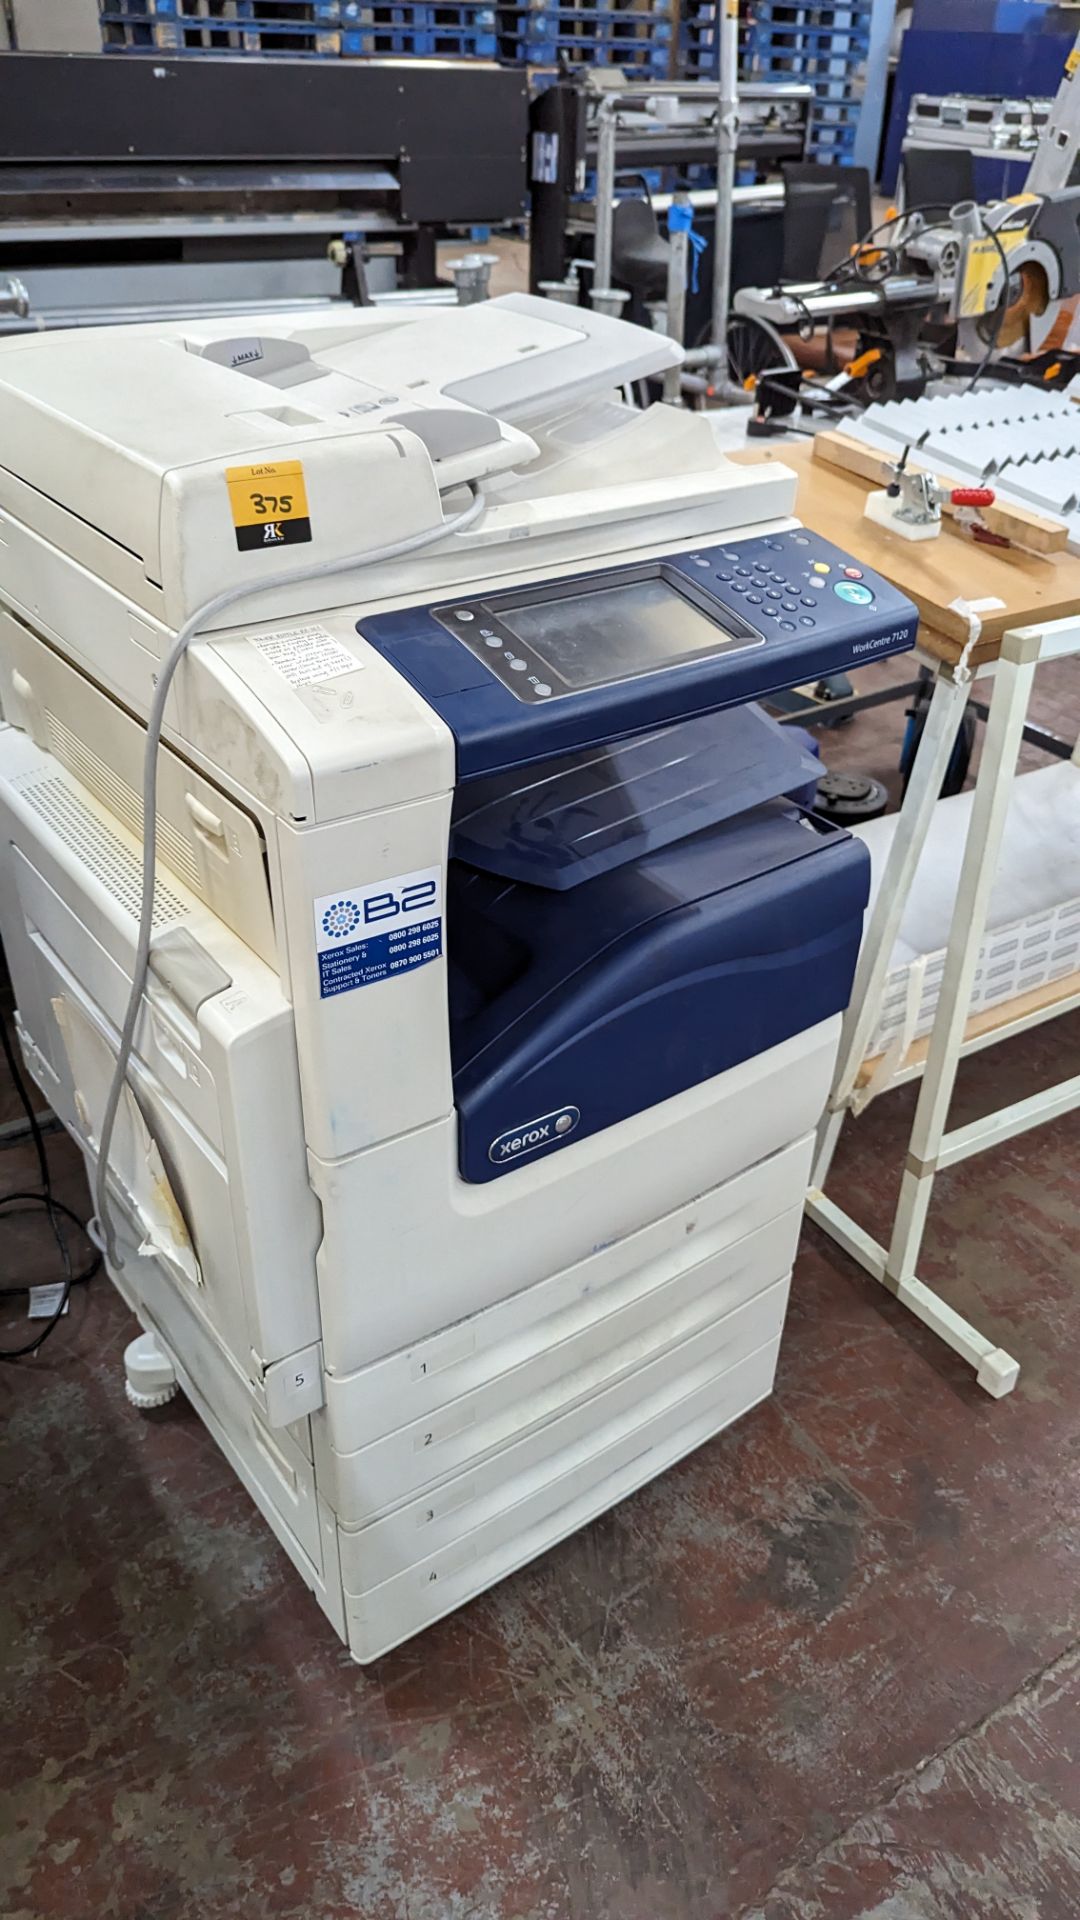 Xerox WorkCentre 7120 floor standing multifunction copier with 4 paper cassettes, auto document feed - Image 3 of 11